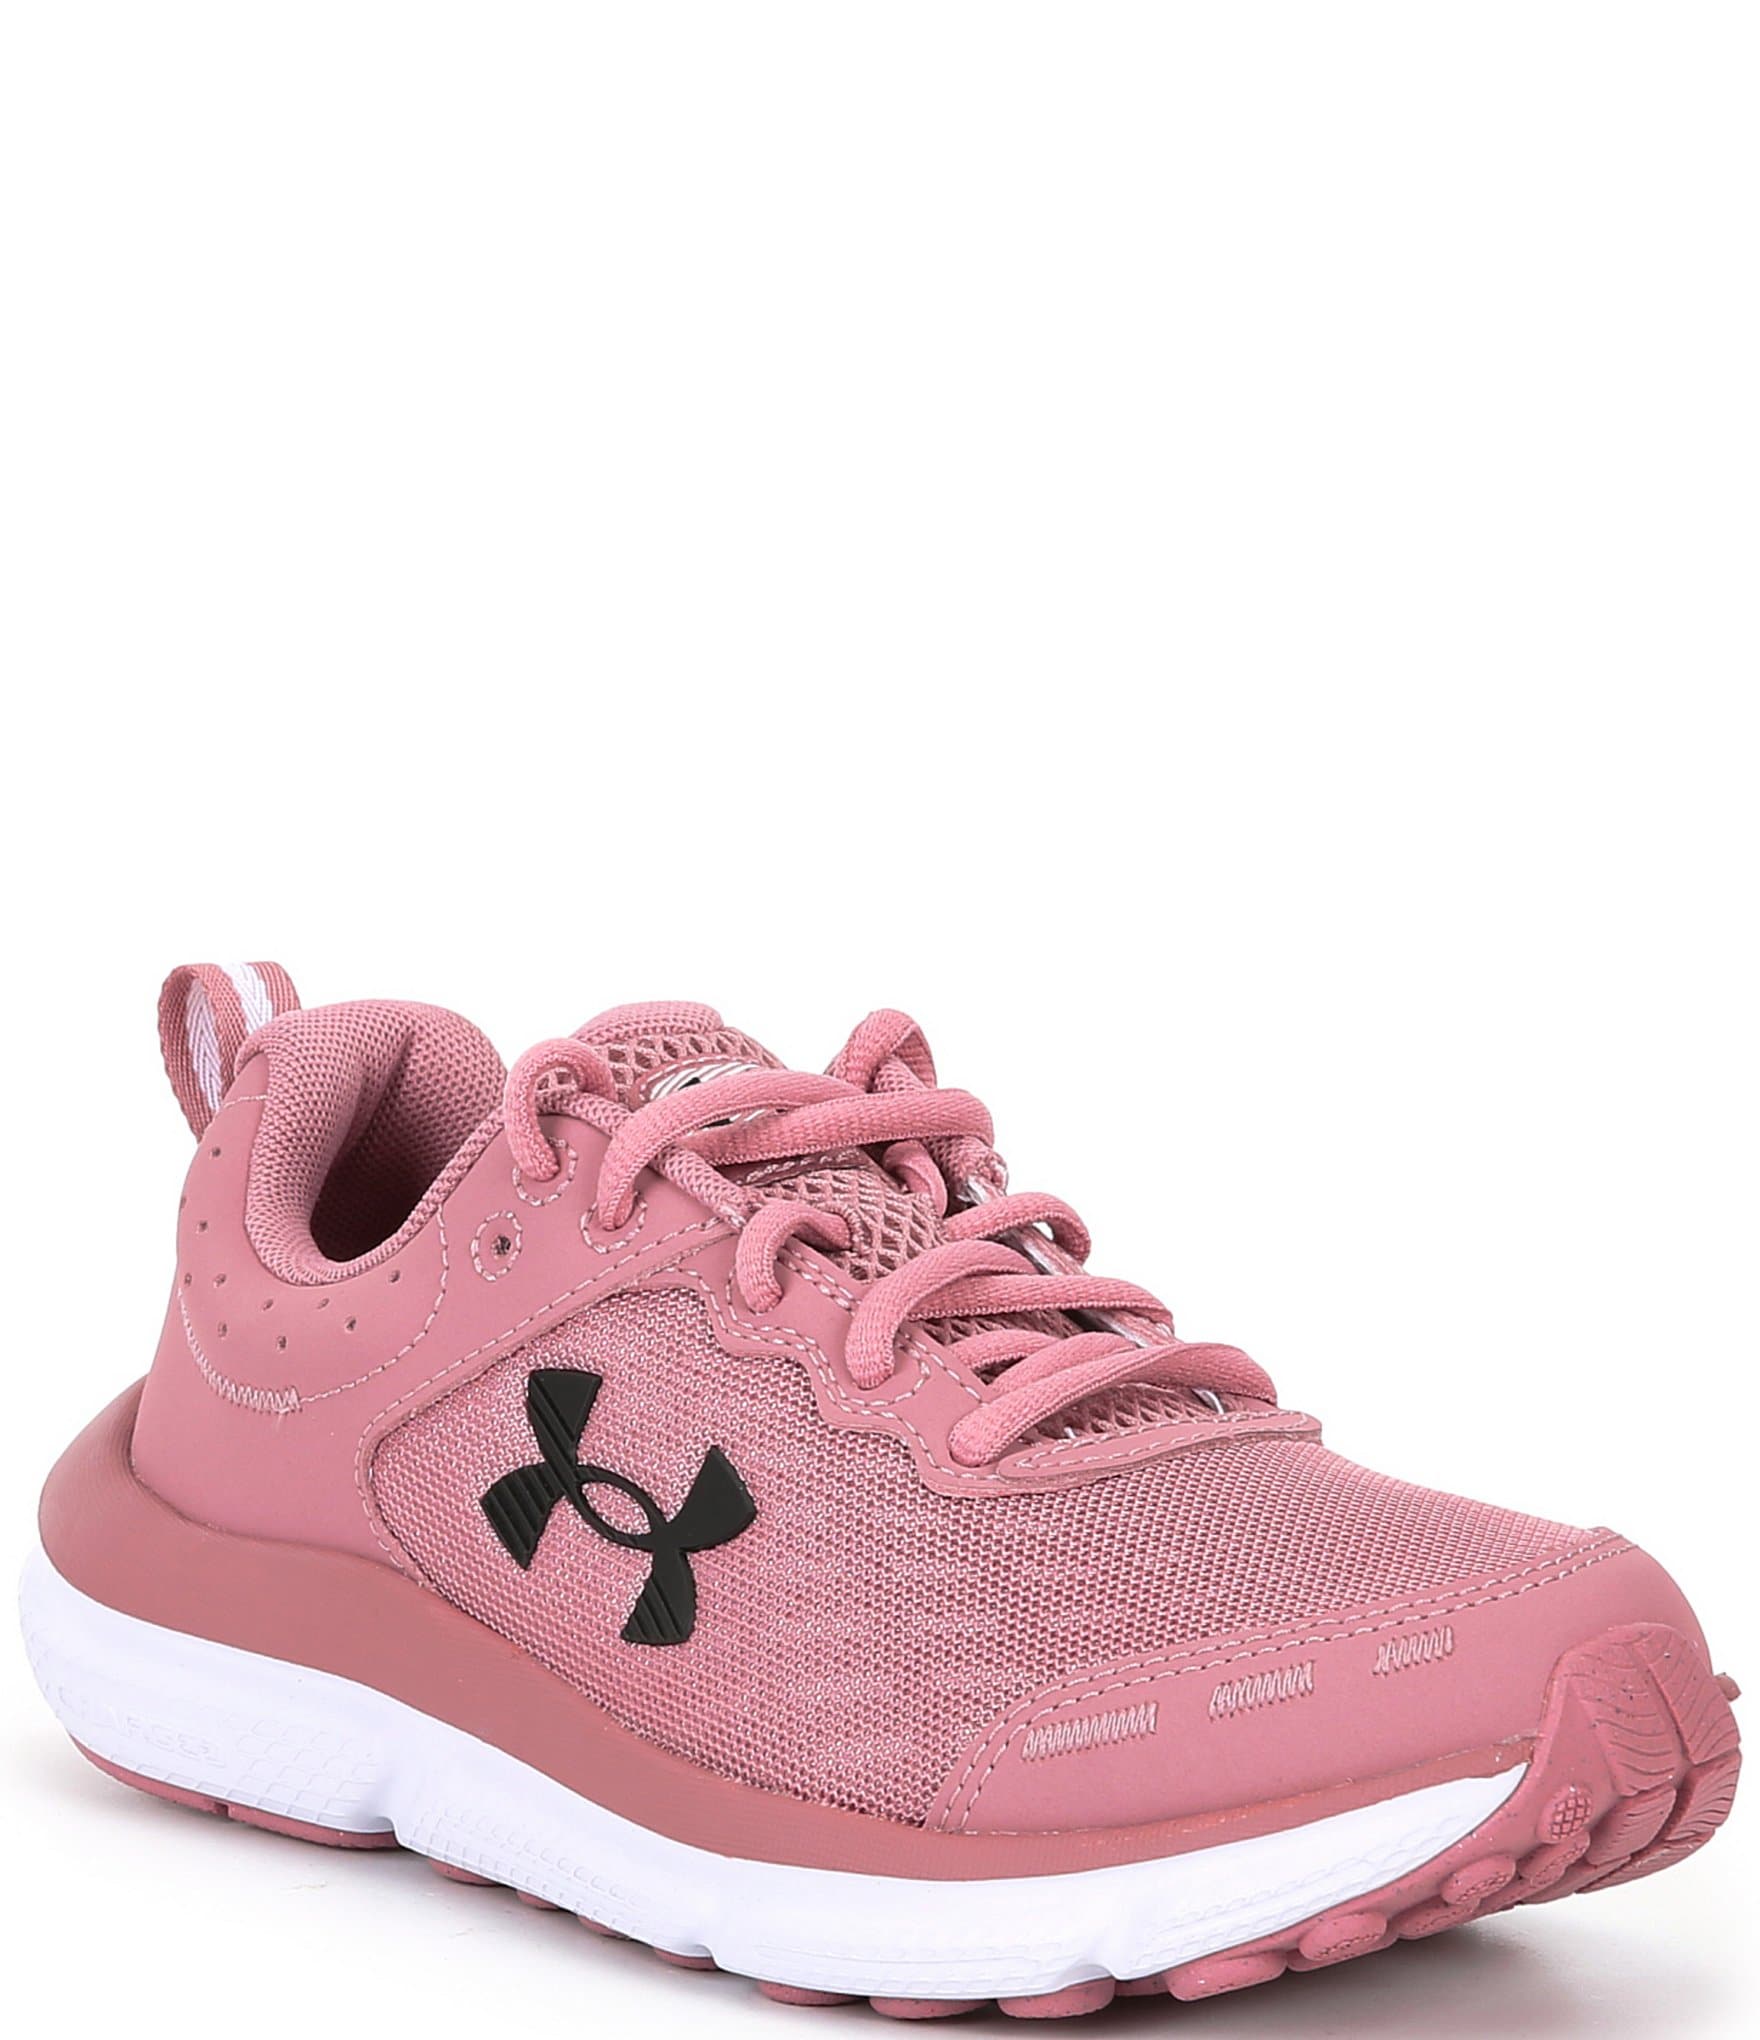 ZAPATILLA UNDER ARMOUR CHARGED ASSERT 9